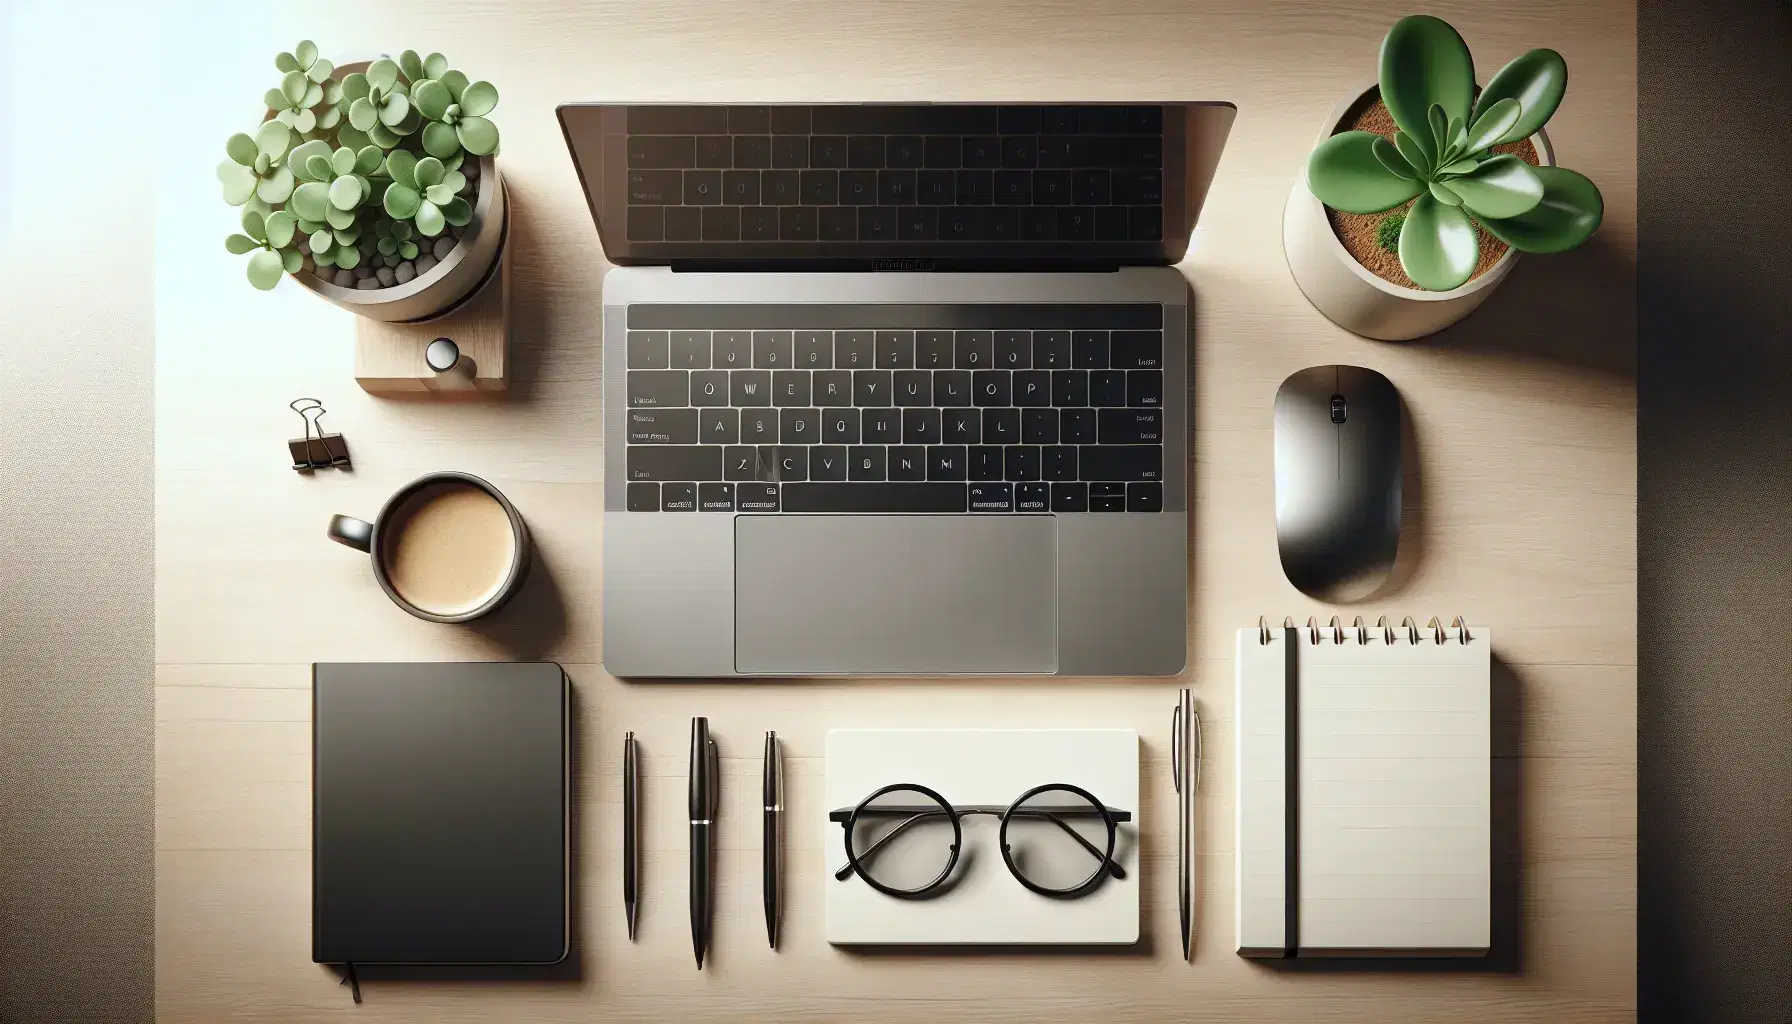 Organized desk with open laptop, black mouse, glasses, green plant, notepad with pen, coffee cup and colorful books.